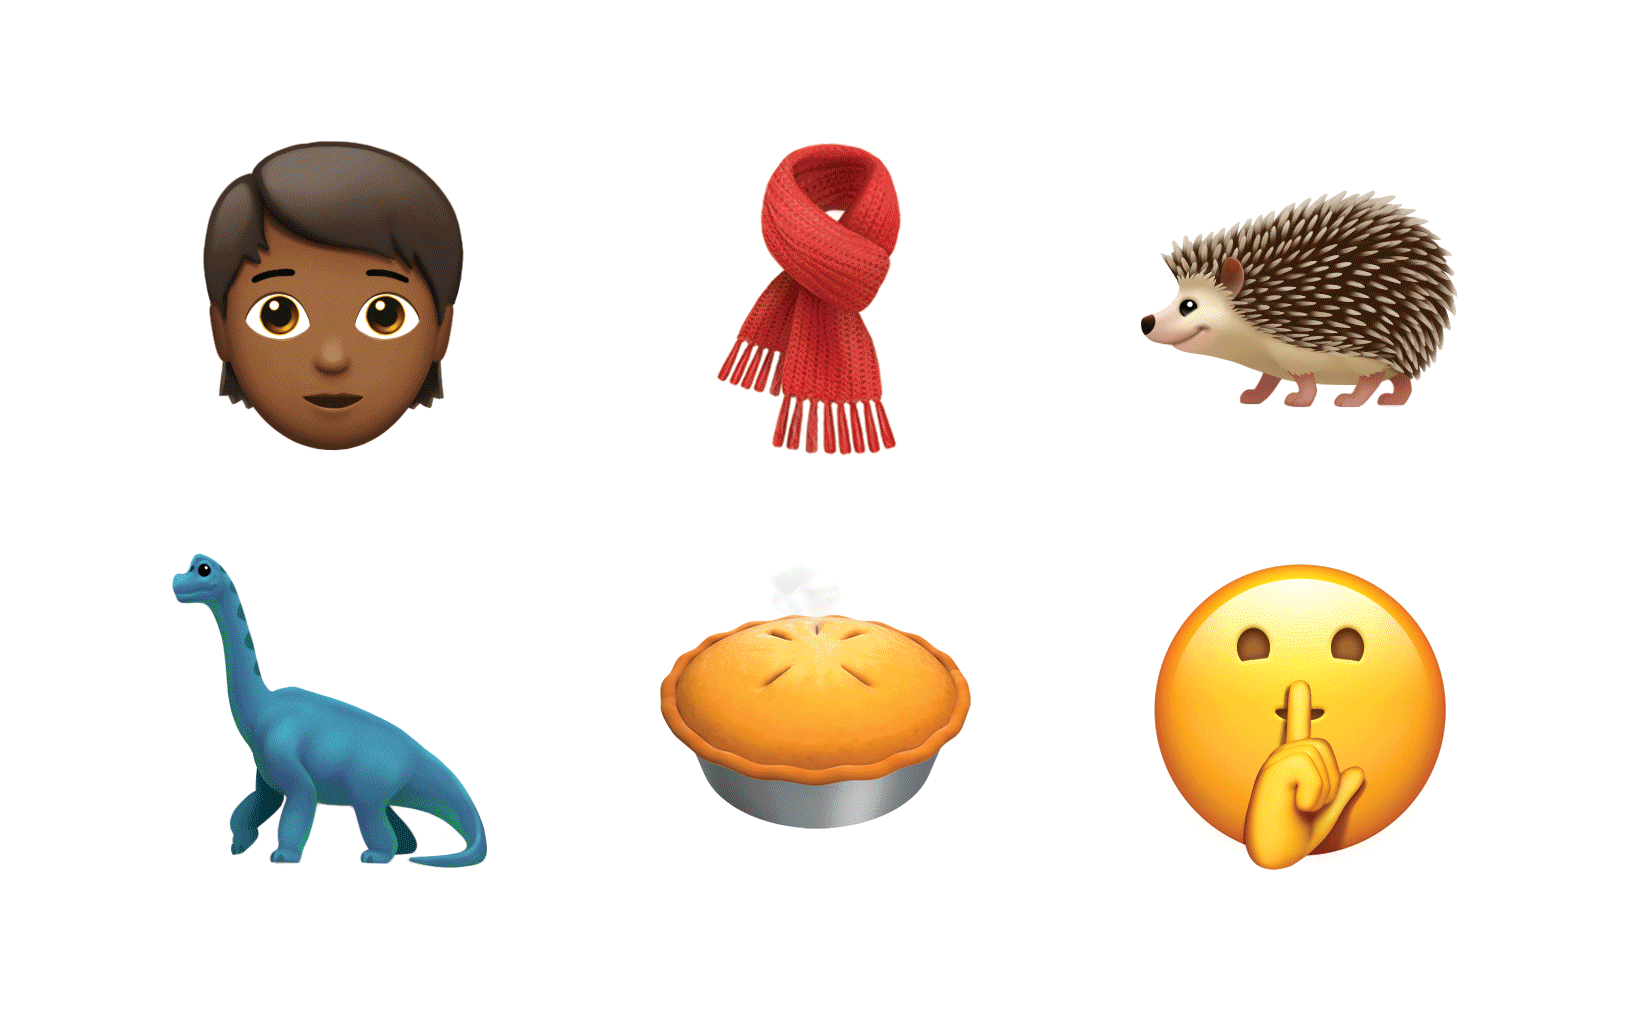 Apple reveals new emoji coming to iPhone and iPad, including “I love